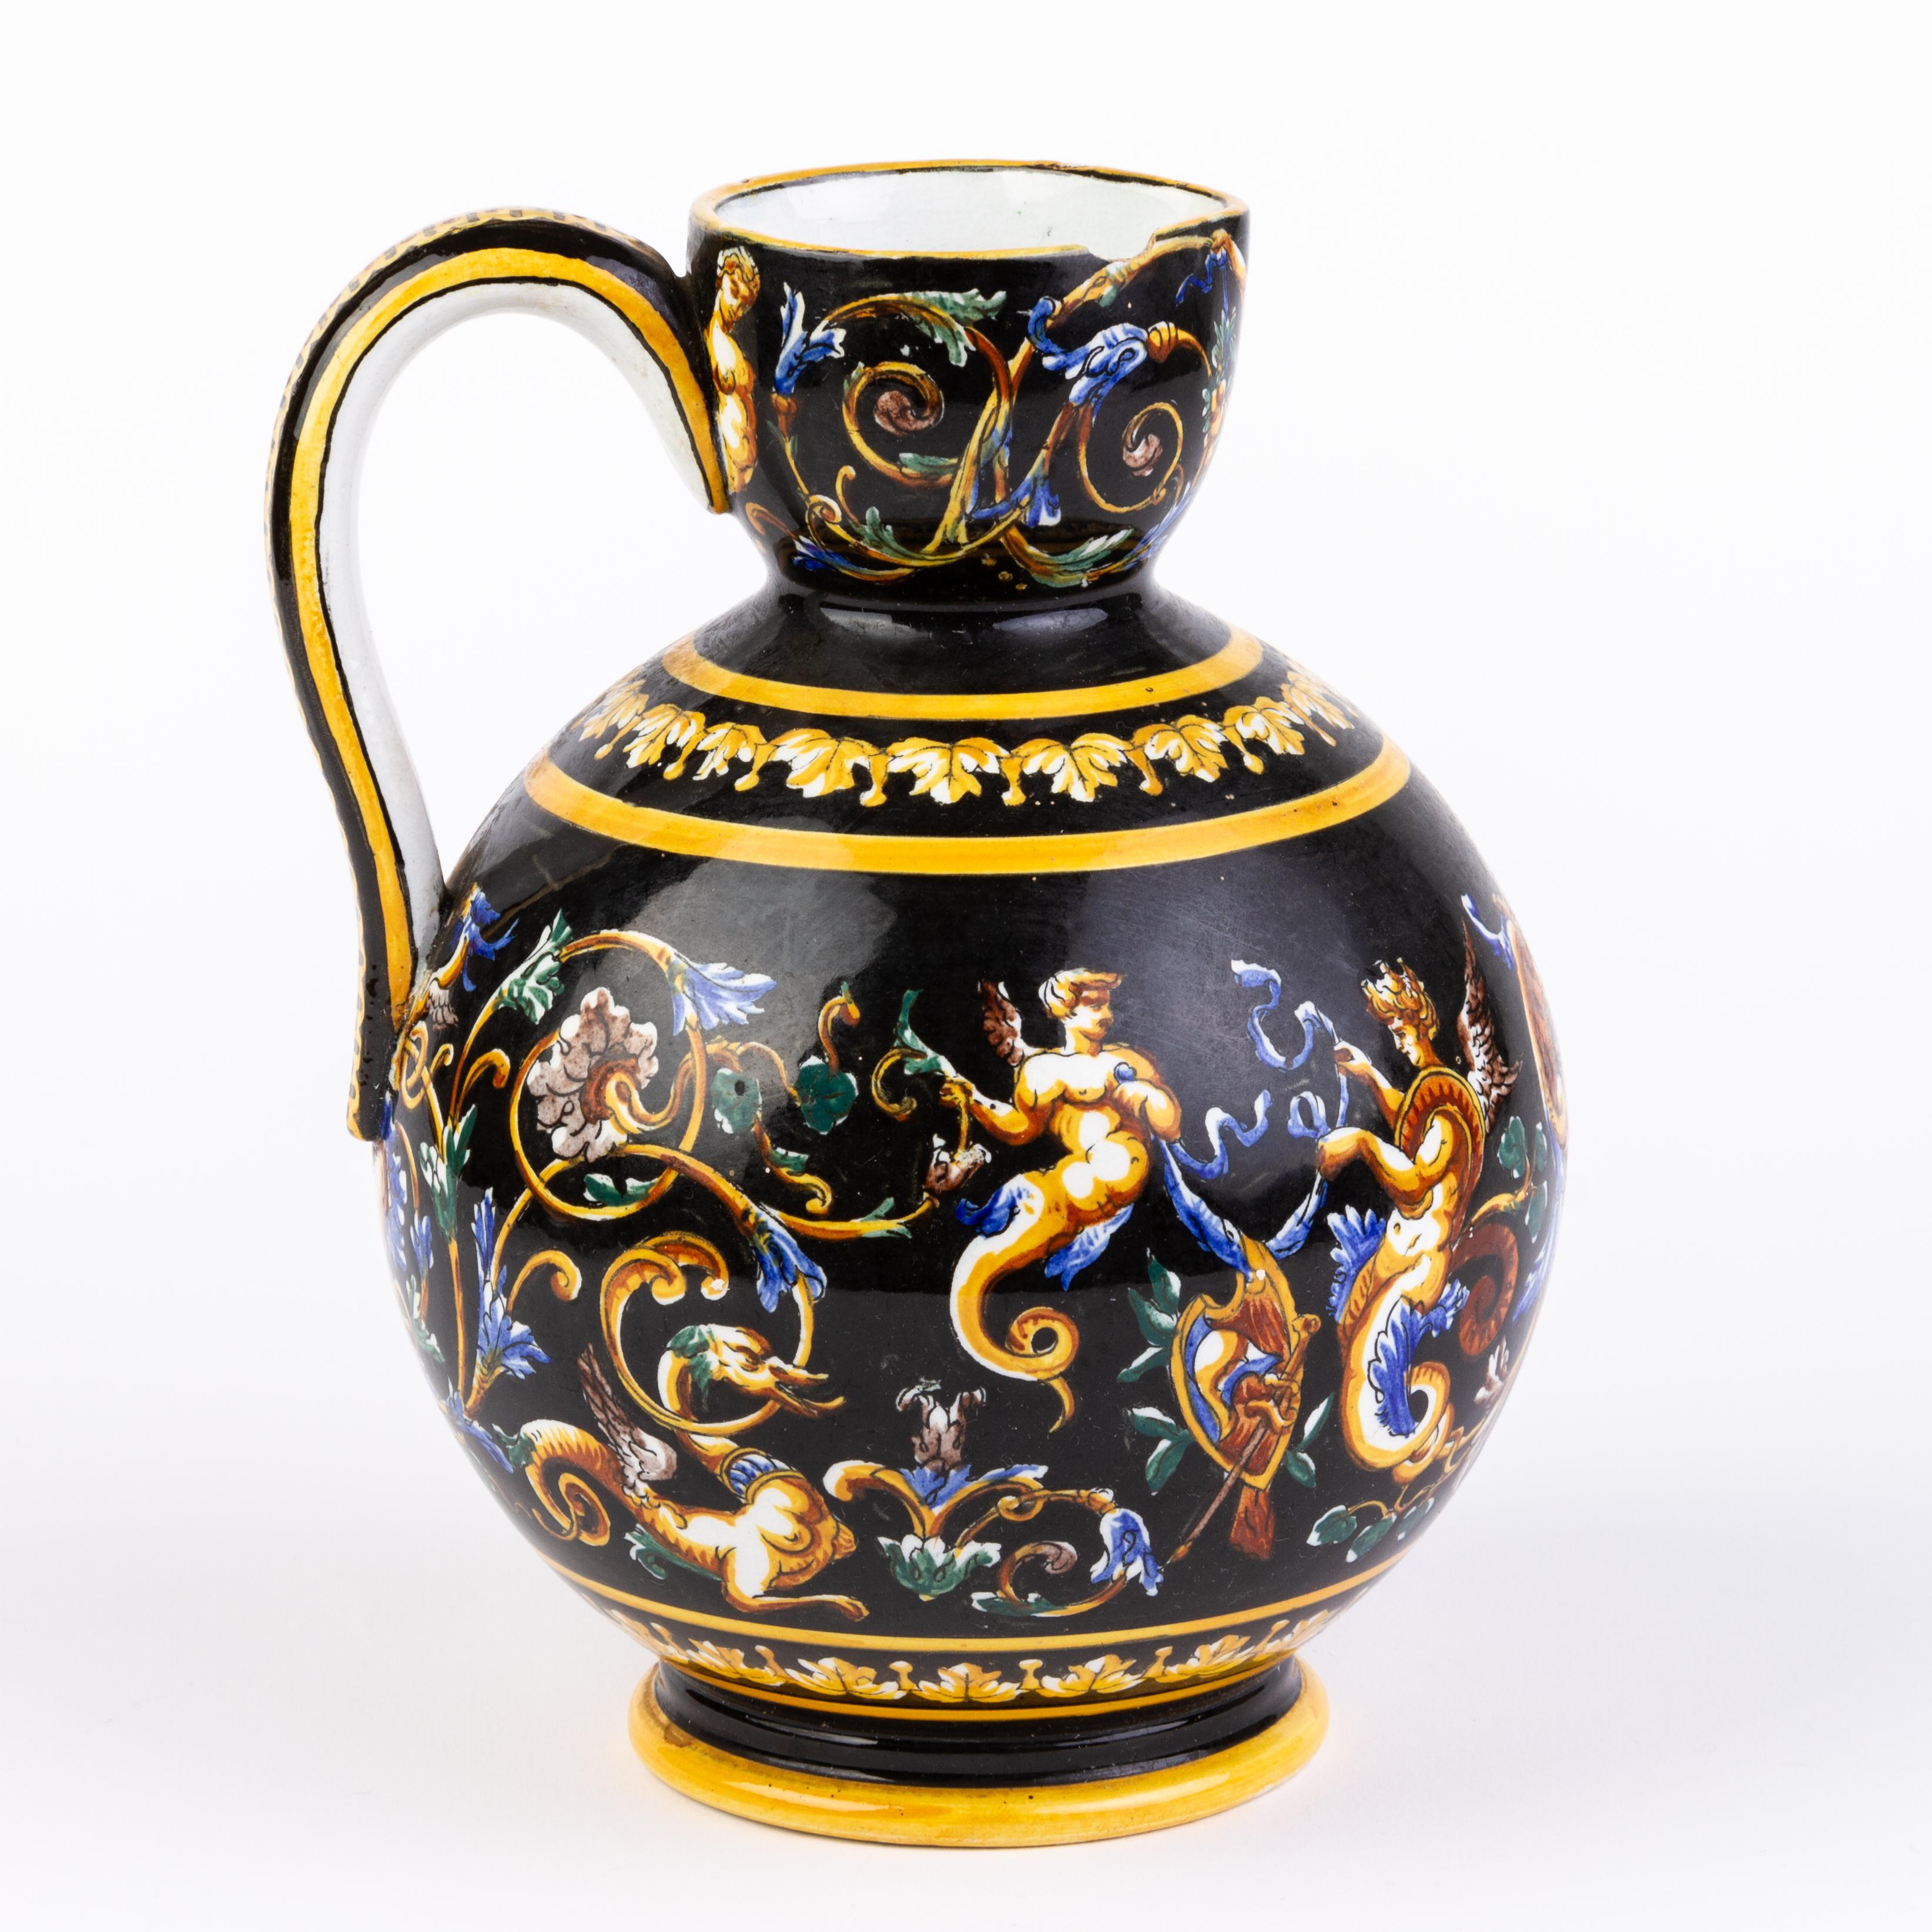 Polychromed Gien French Faience Glazed Majolica Neoclassical Ewer Pitcher Jug 19th Century For Sale